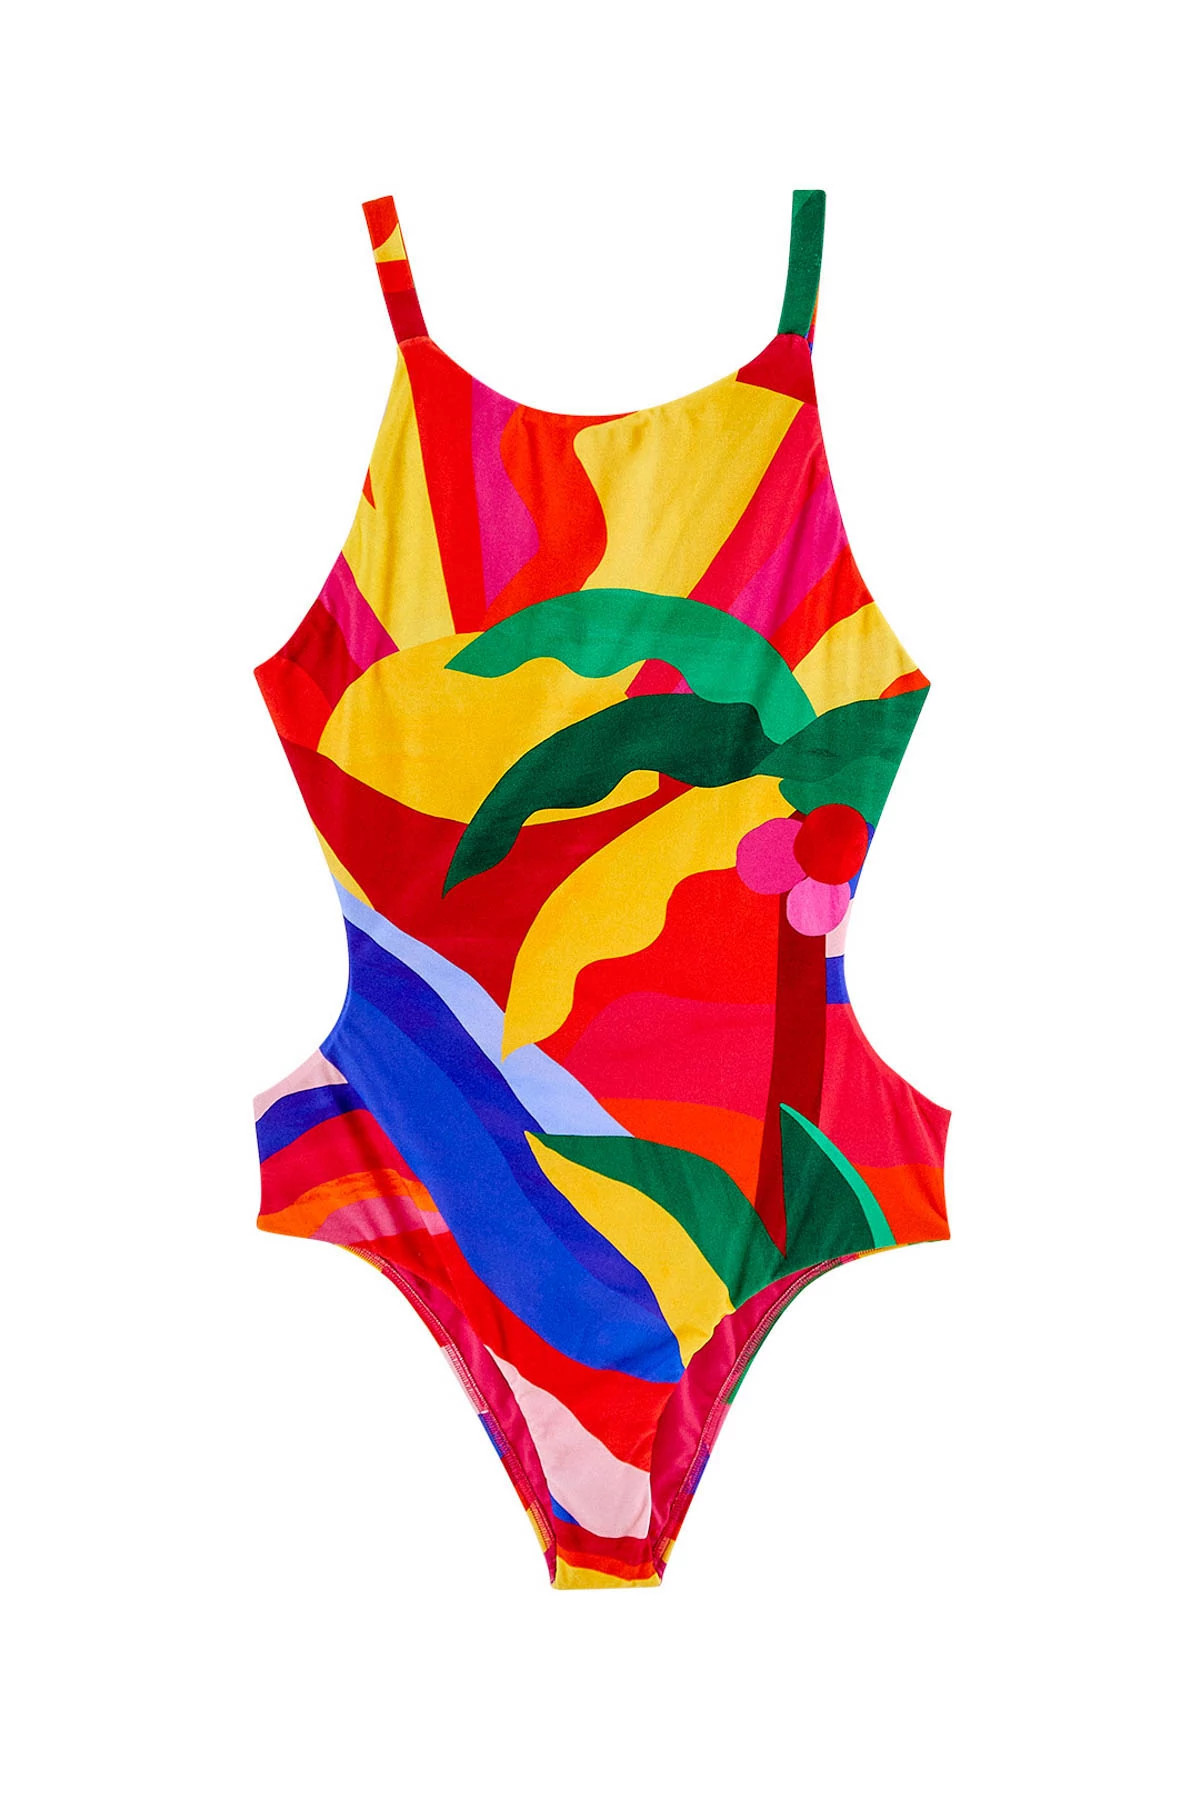 GRAPHIC SUNSHINE Graphic Sunshine High Neck One Piece Swimsuit image number 4